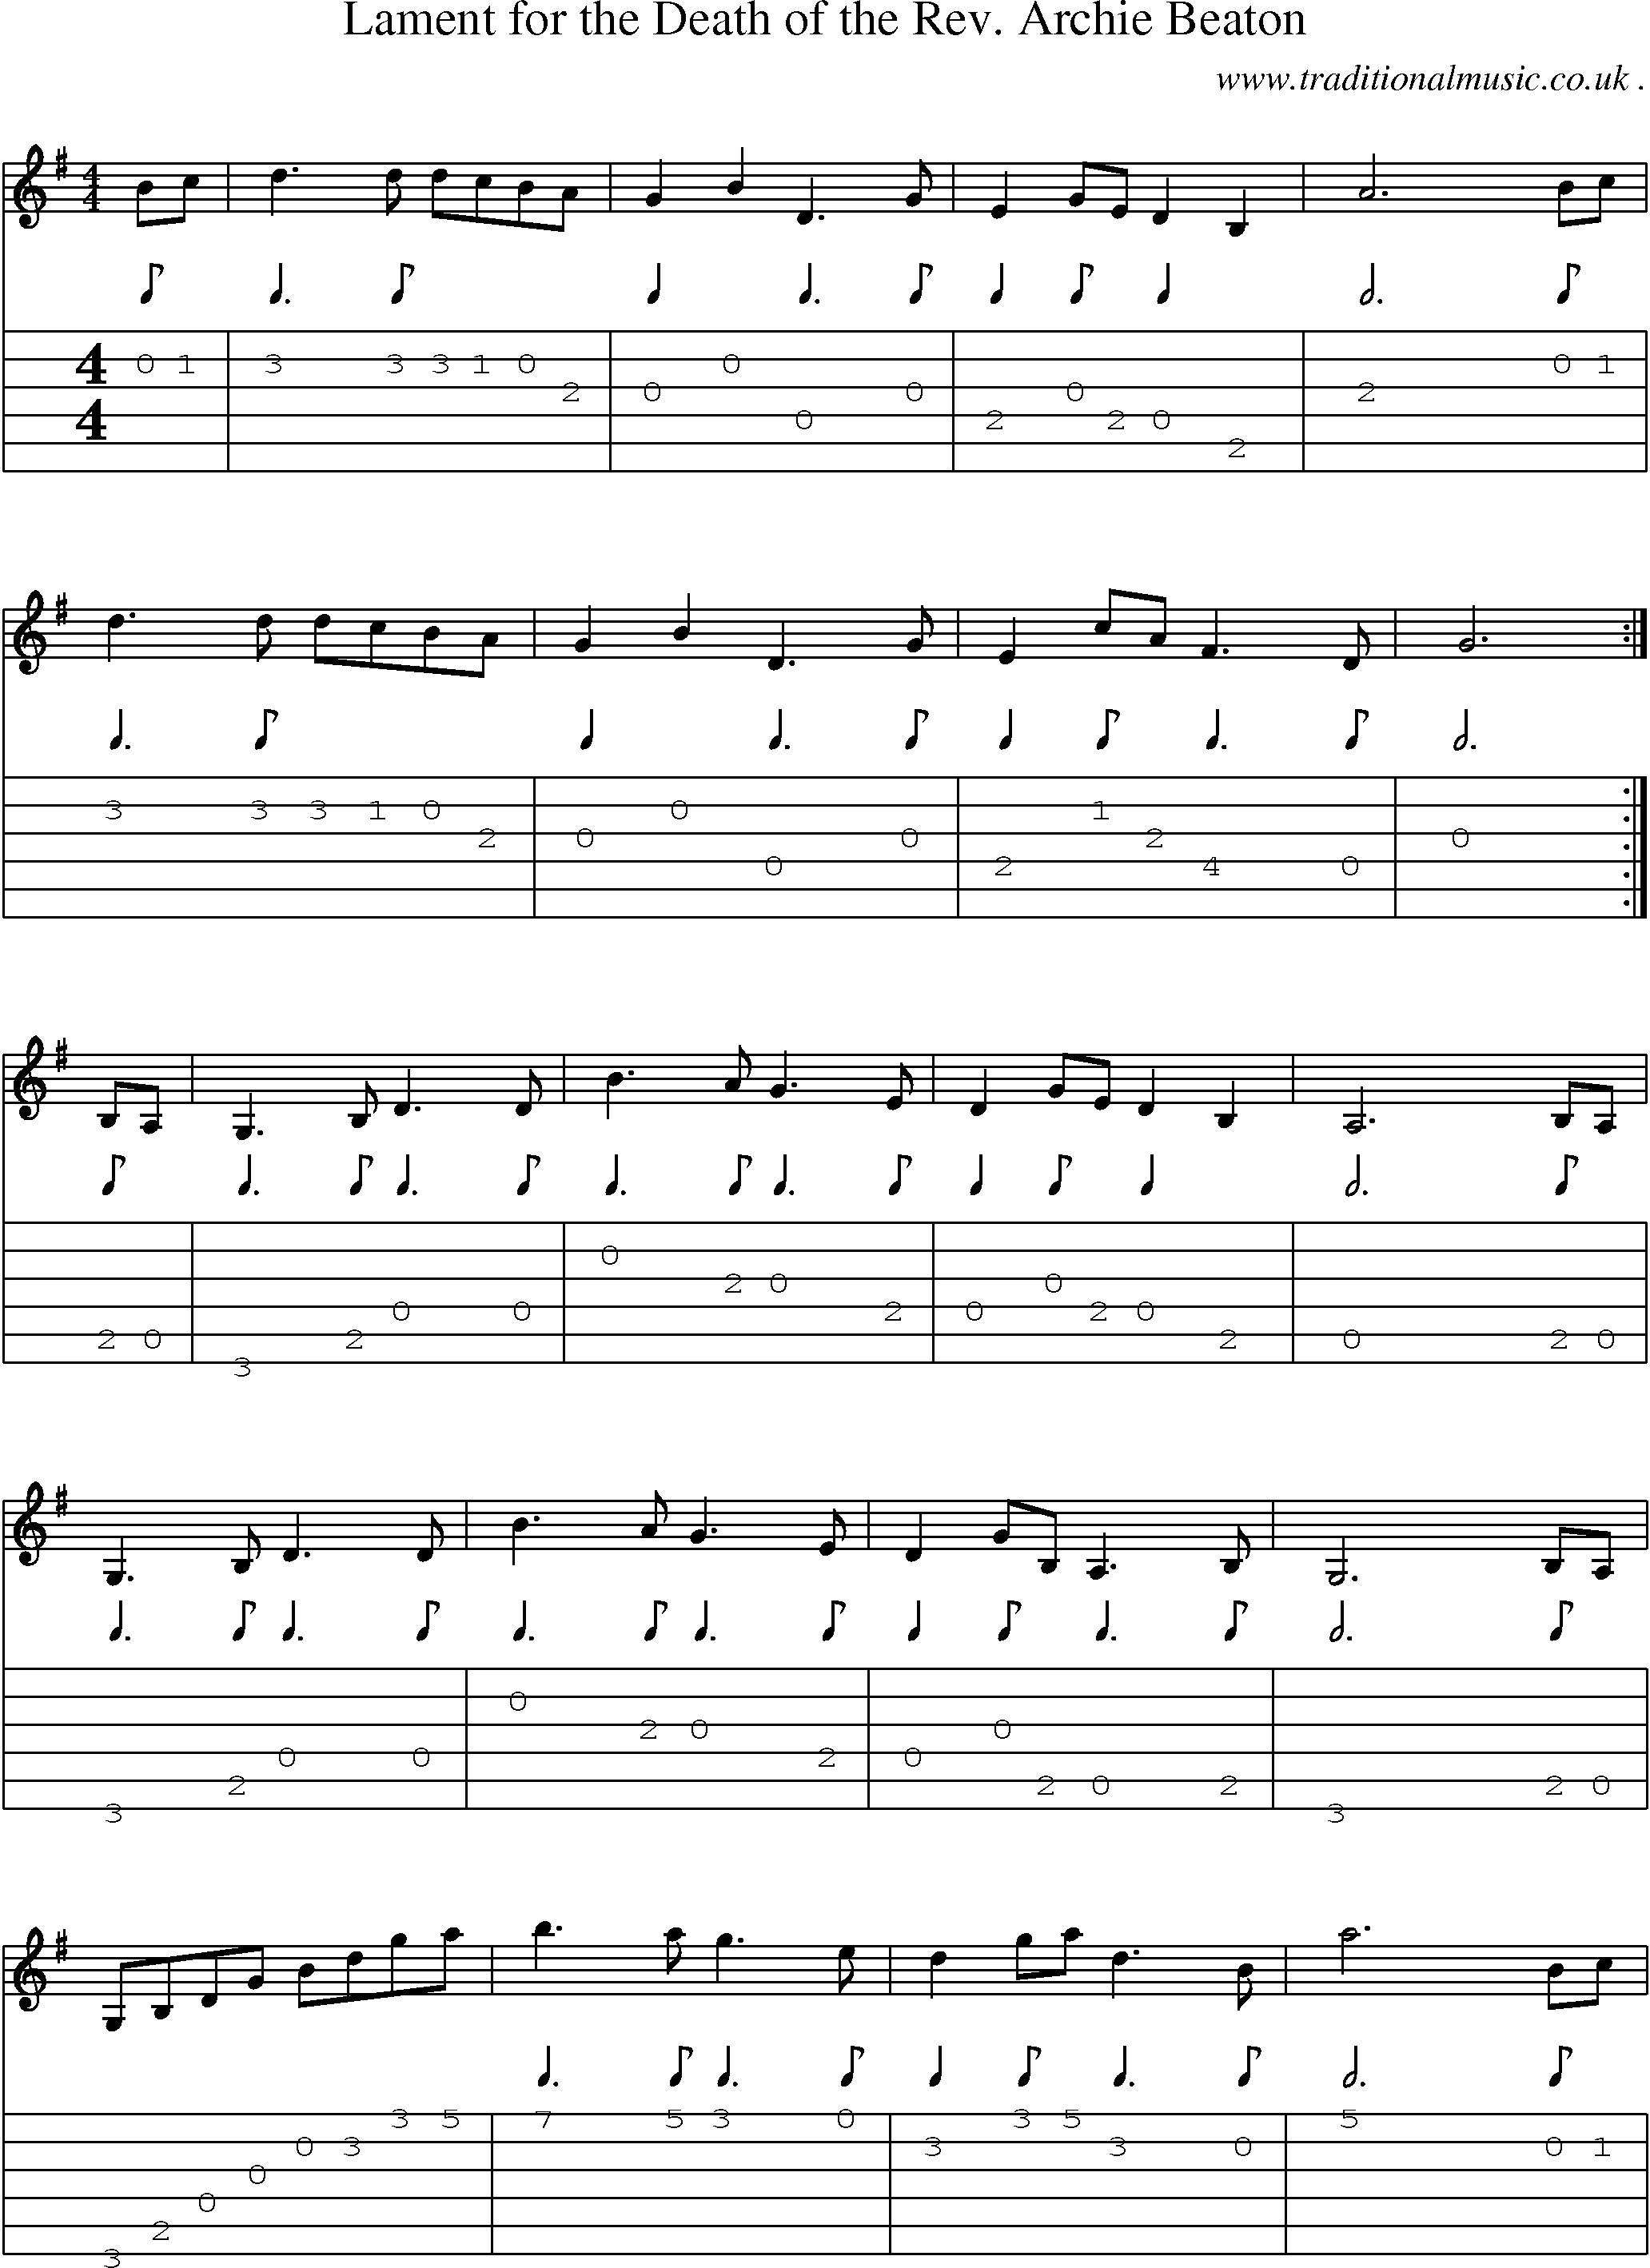 Sheet-music  score, Chords and Guitar Tabs for Lament For The Death Of The Rev Archie Beaton